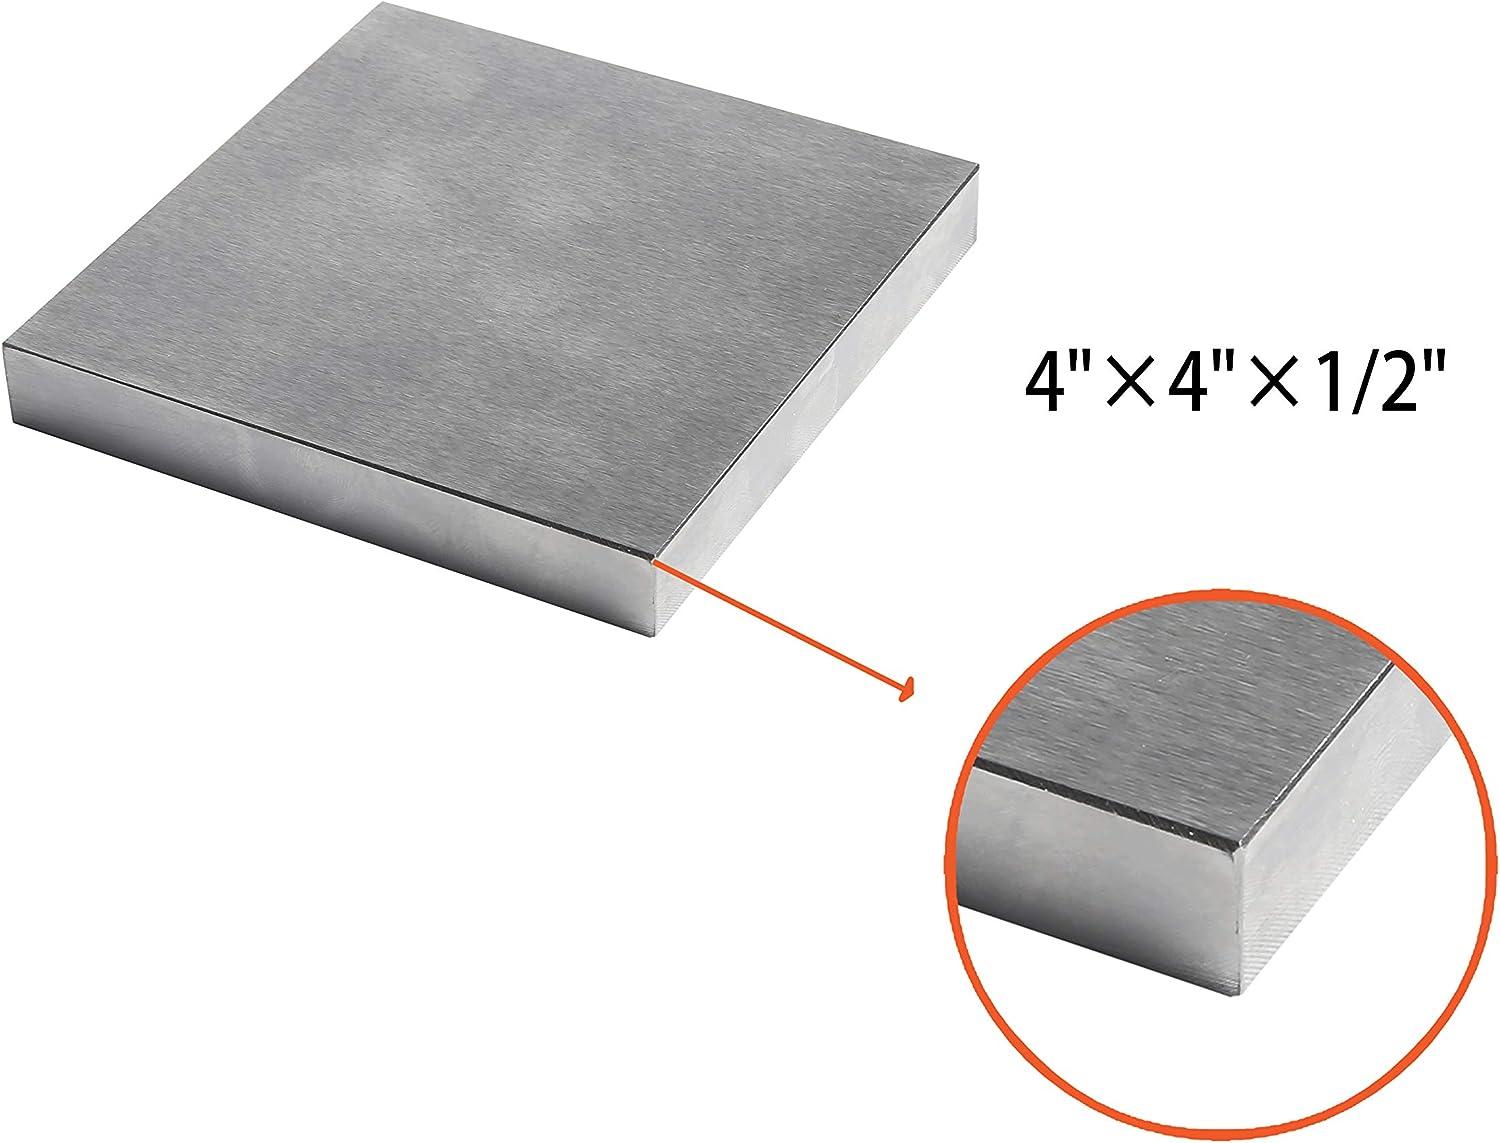 HimaPro Steel Bench Block 4x4 Flat Anvil Jewelers Tool Metal Bench Block  for Jewelry & Stamping (4''x4''x1/2'')